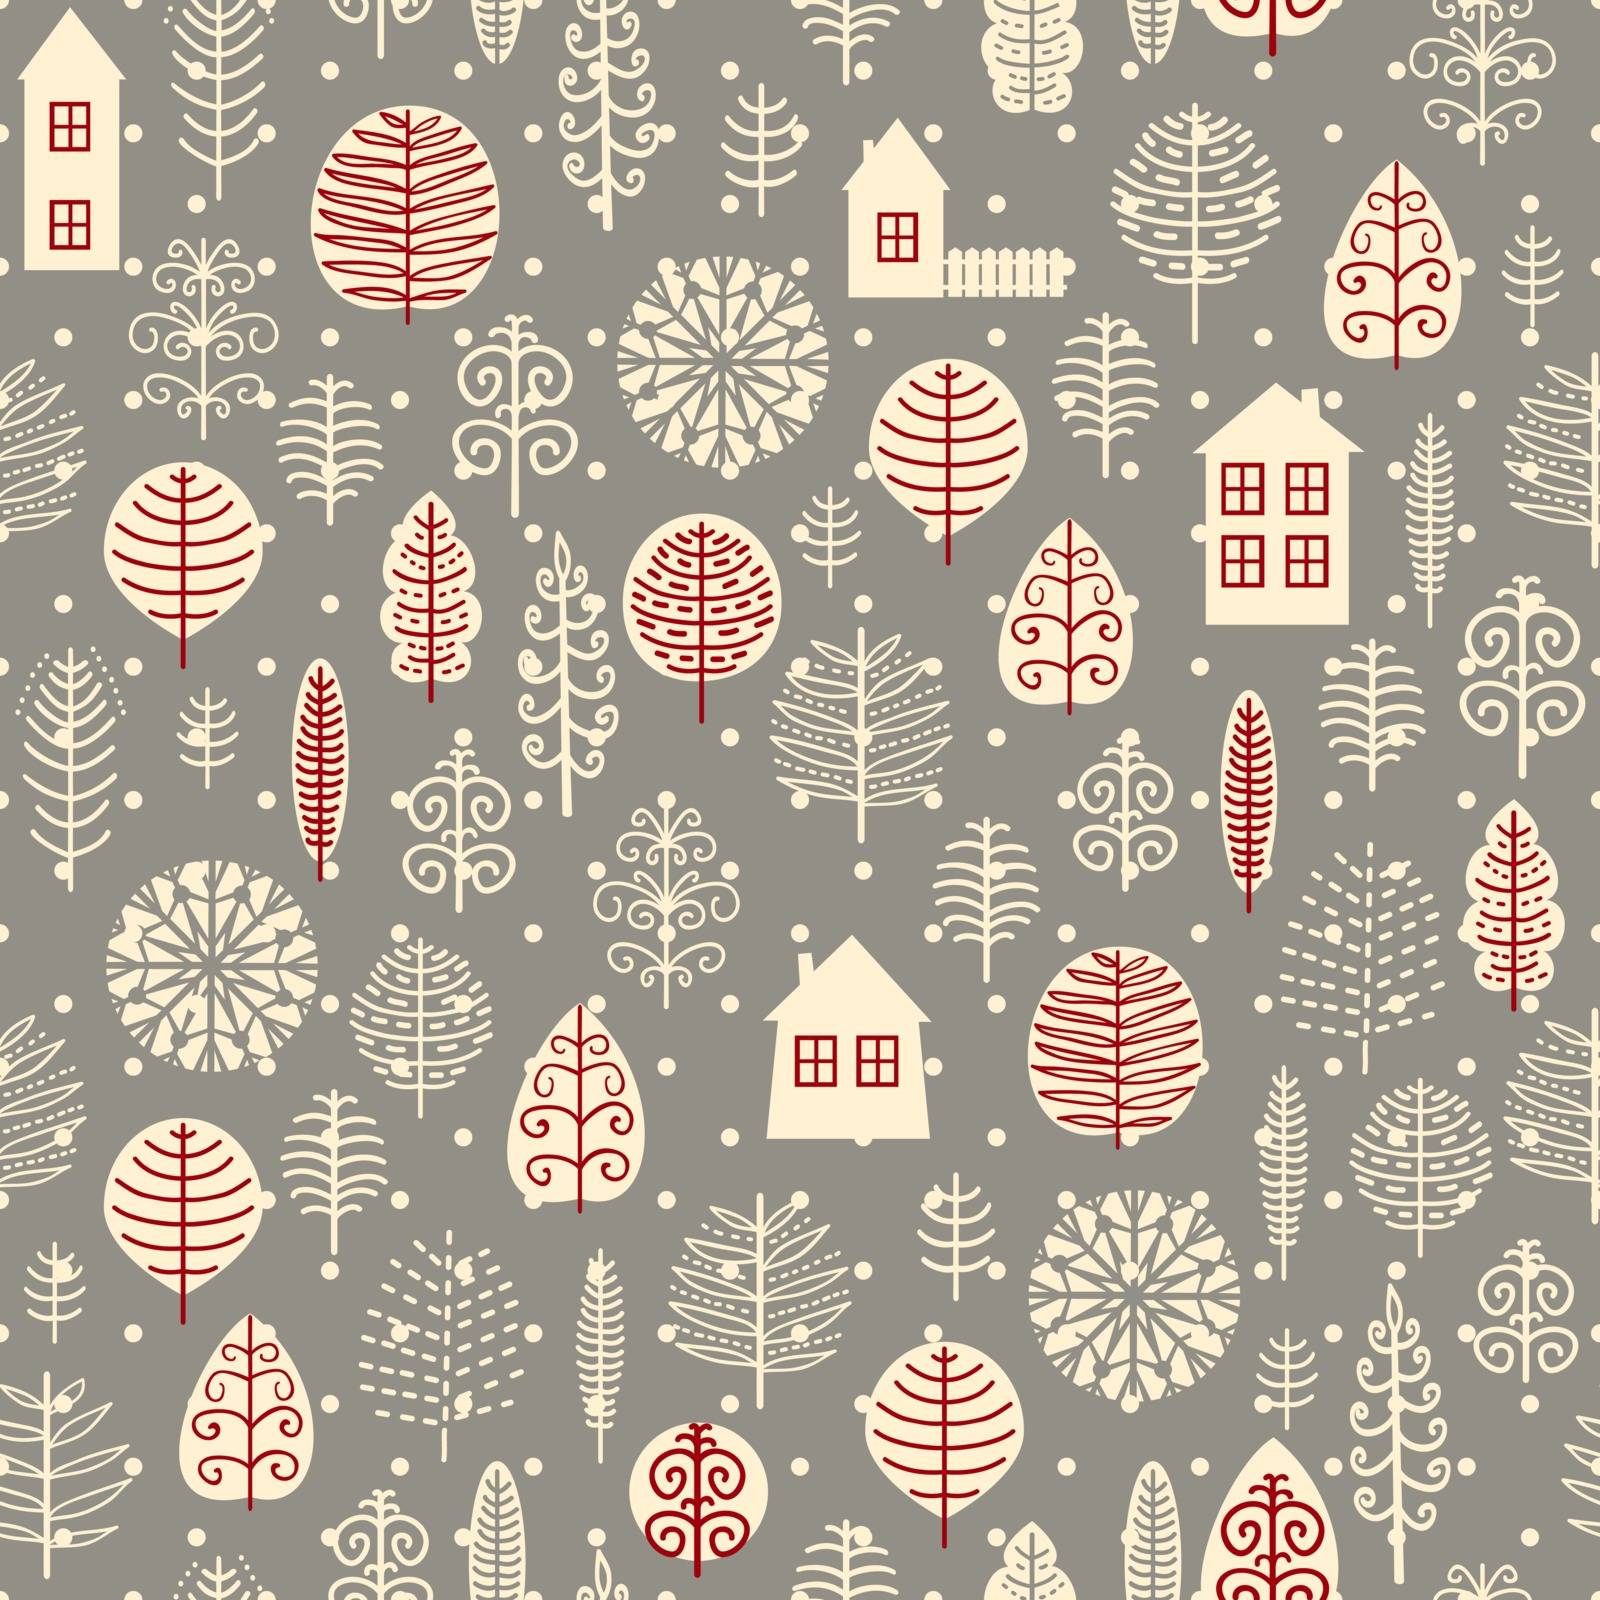 Vector illustration with classic Christmas pattern.